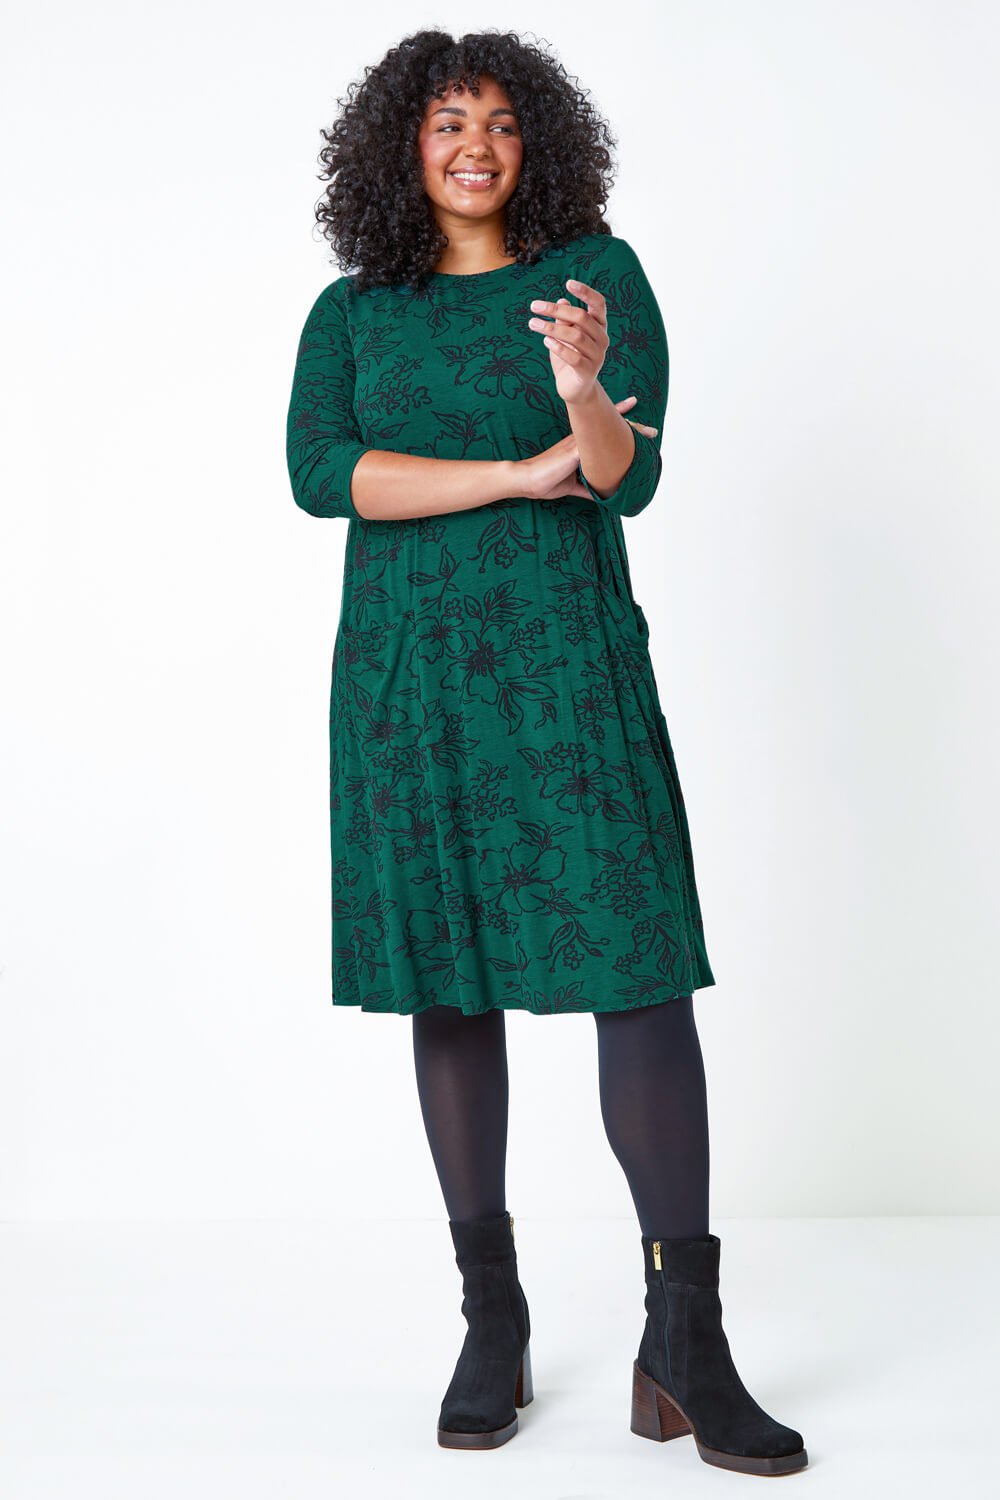 Green Curve Floral Print Swing Stretch Dress, Image 2 of 5